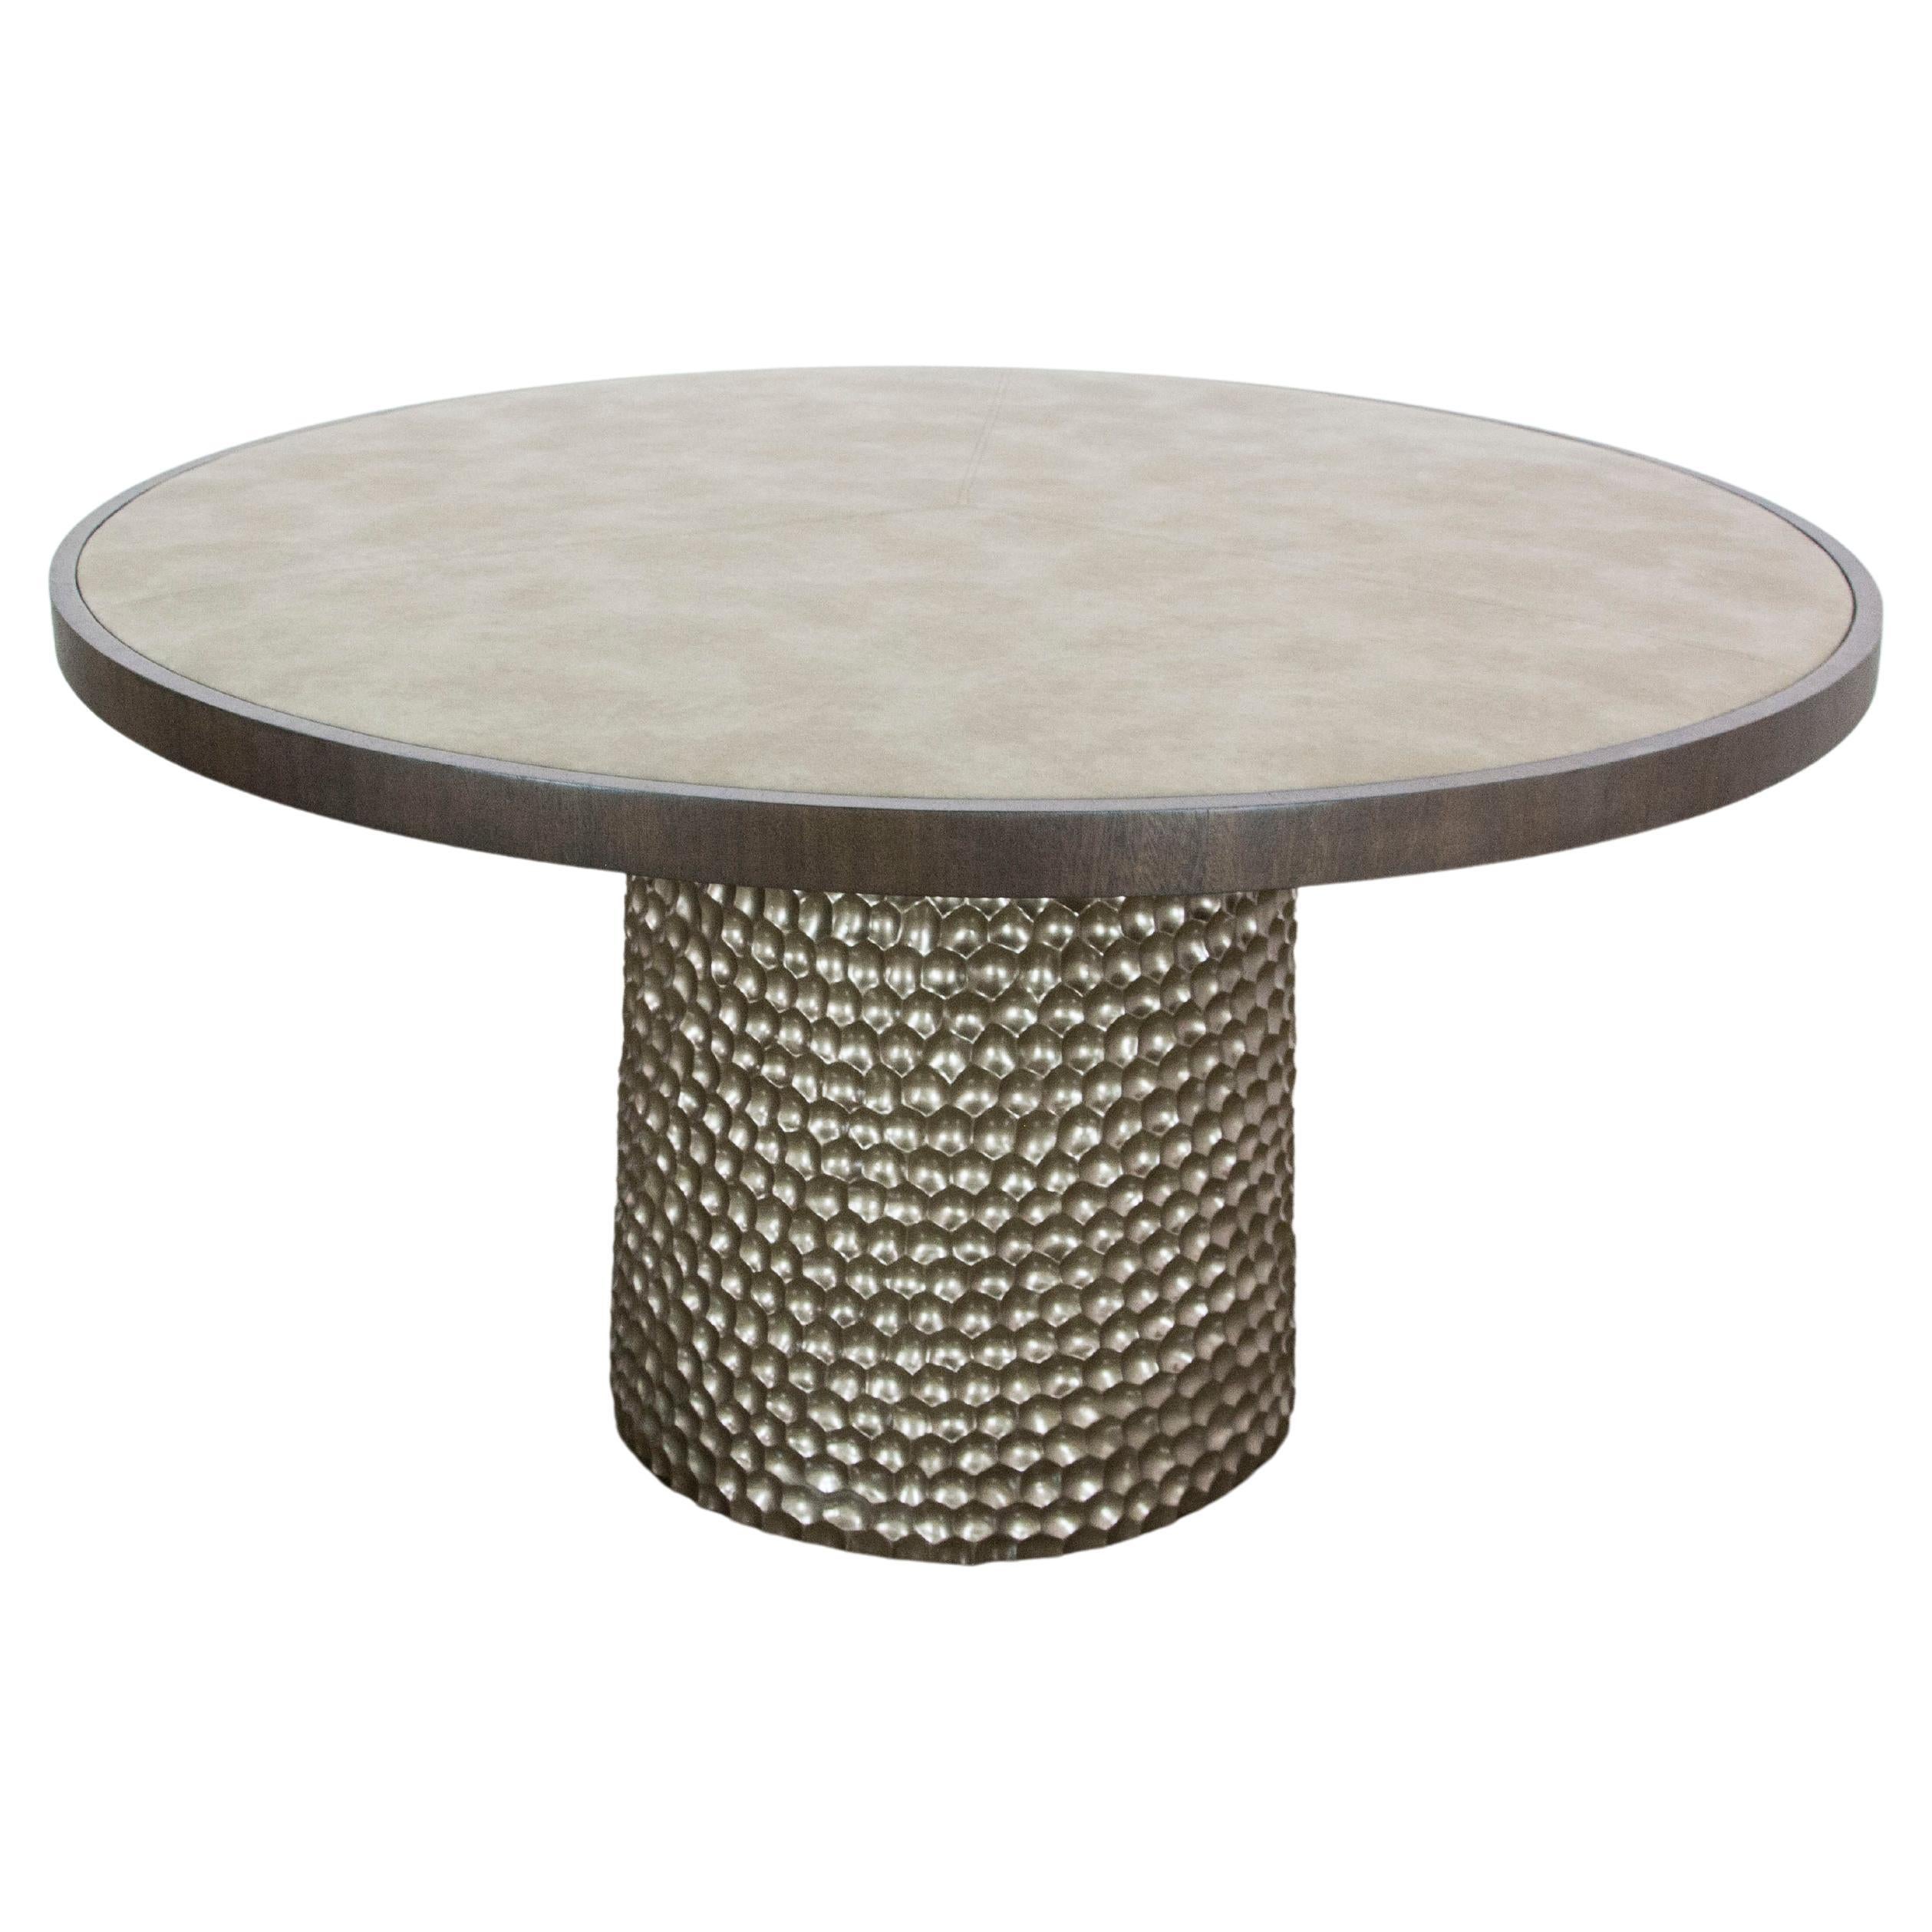 Sculptural Round Carved Wood and Fabric Game Table from Costantini Design, Giada For Sale